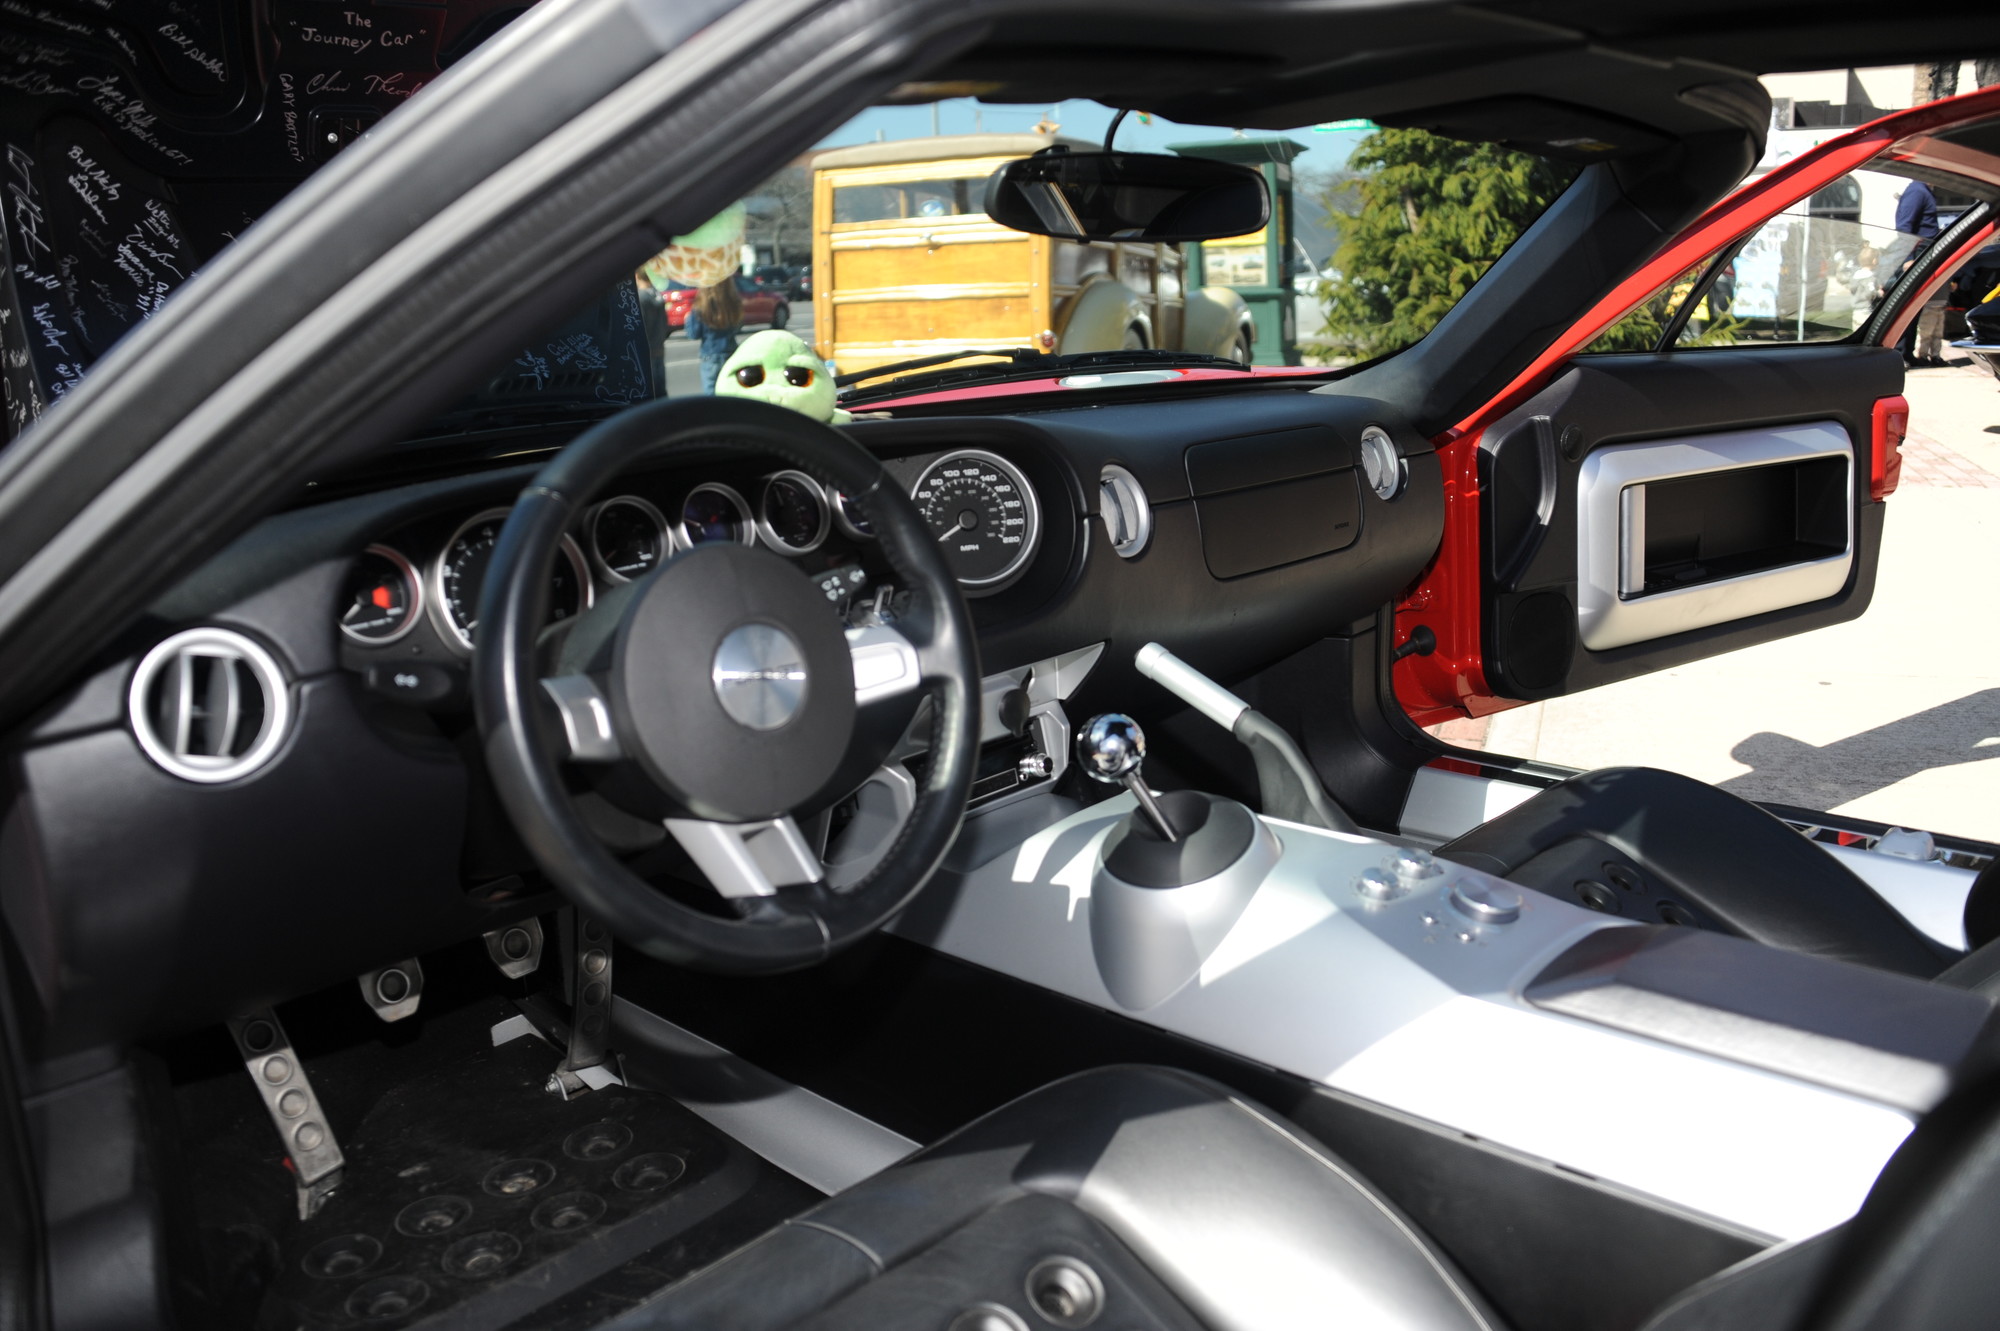 The interior of Joey Limongeli's Ford GT, one of many exotic cars on display last Sunday.